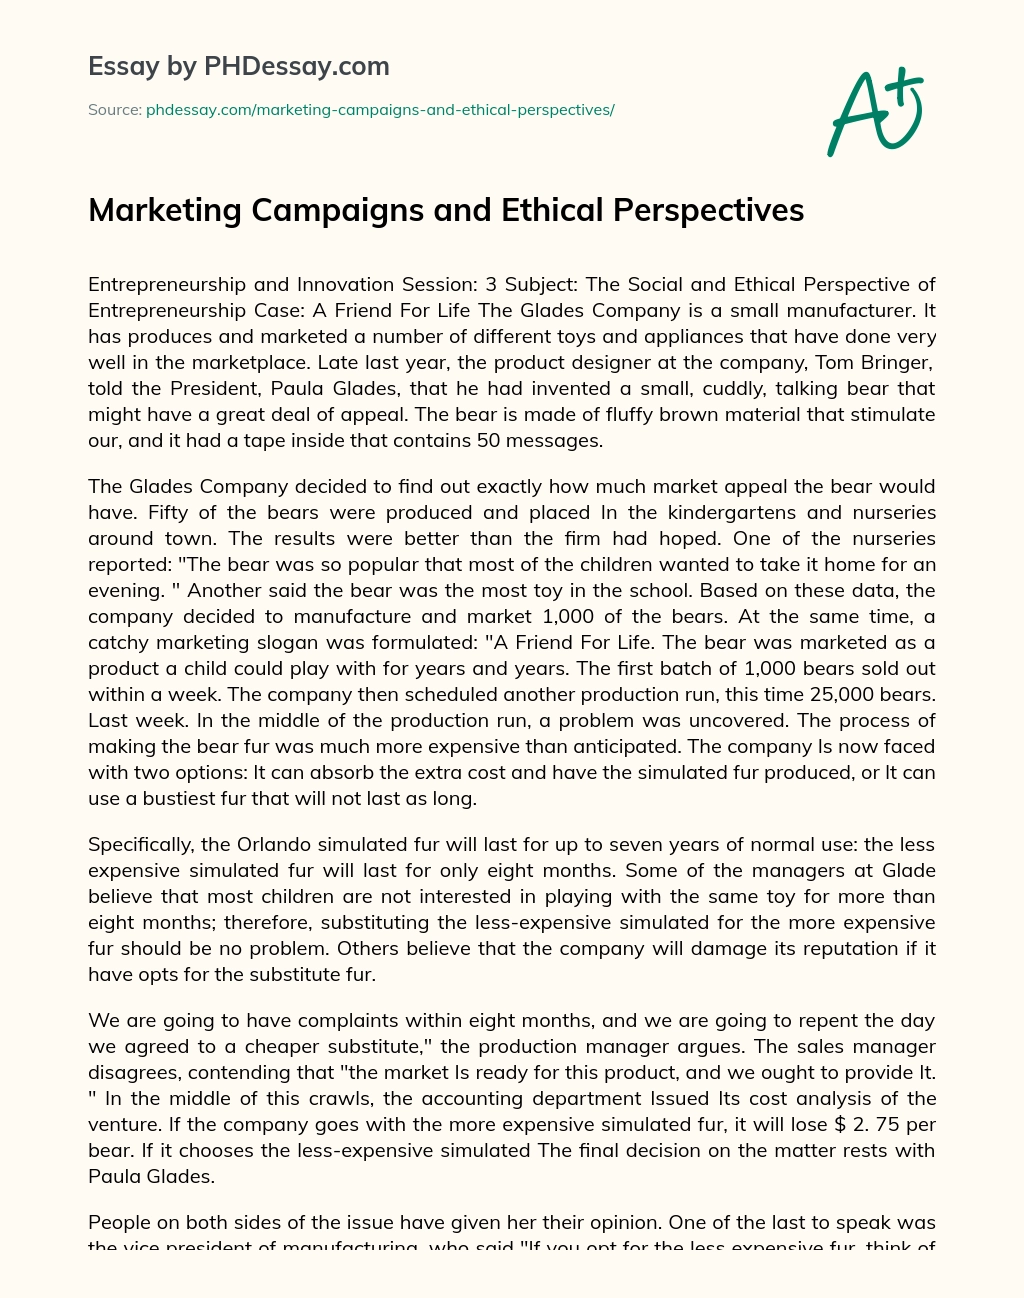 Marketing Campaigns and Ethical Perspectives essay